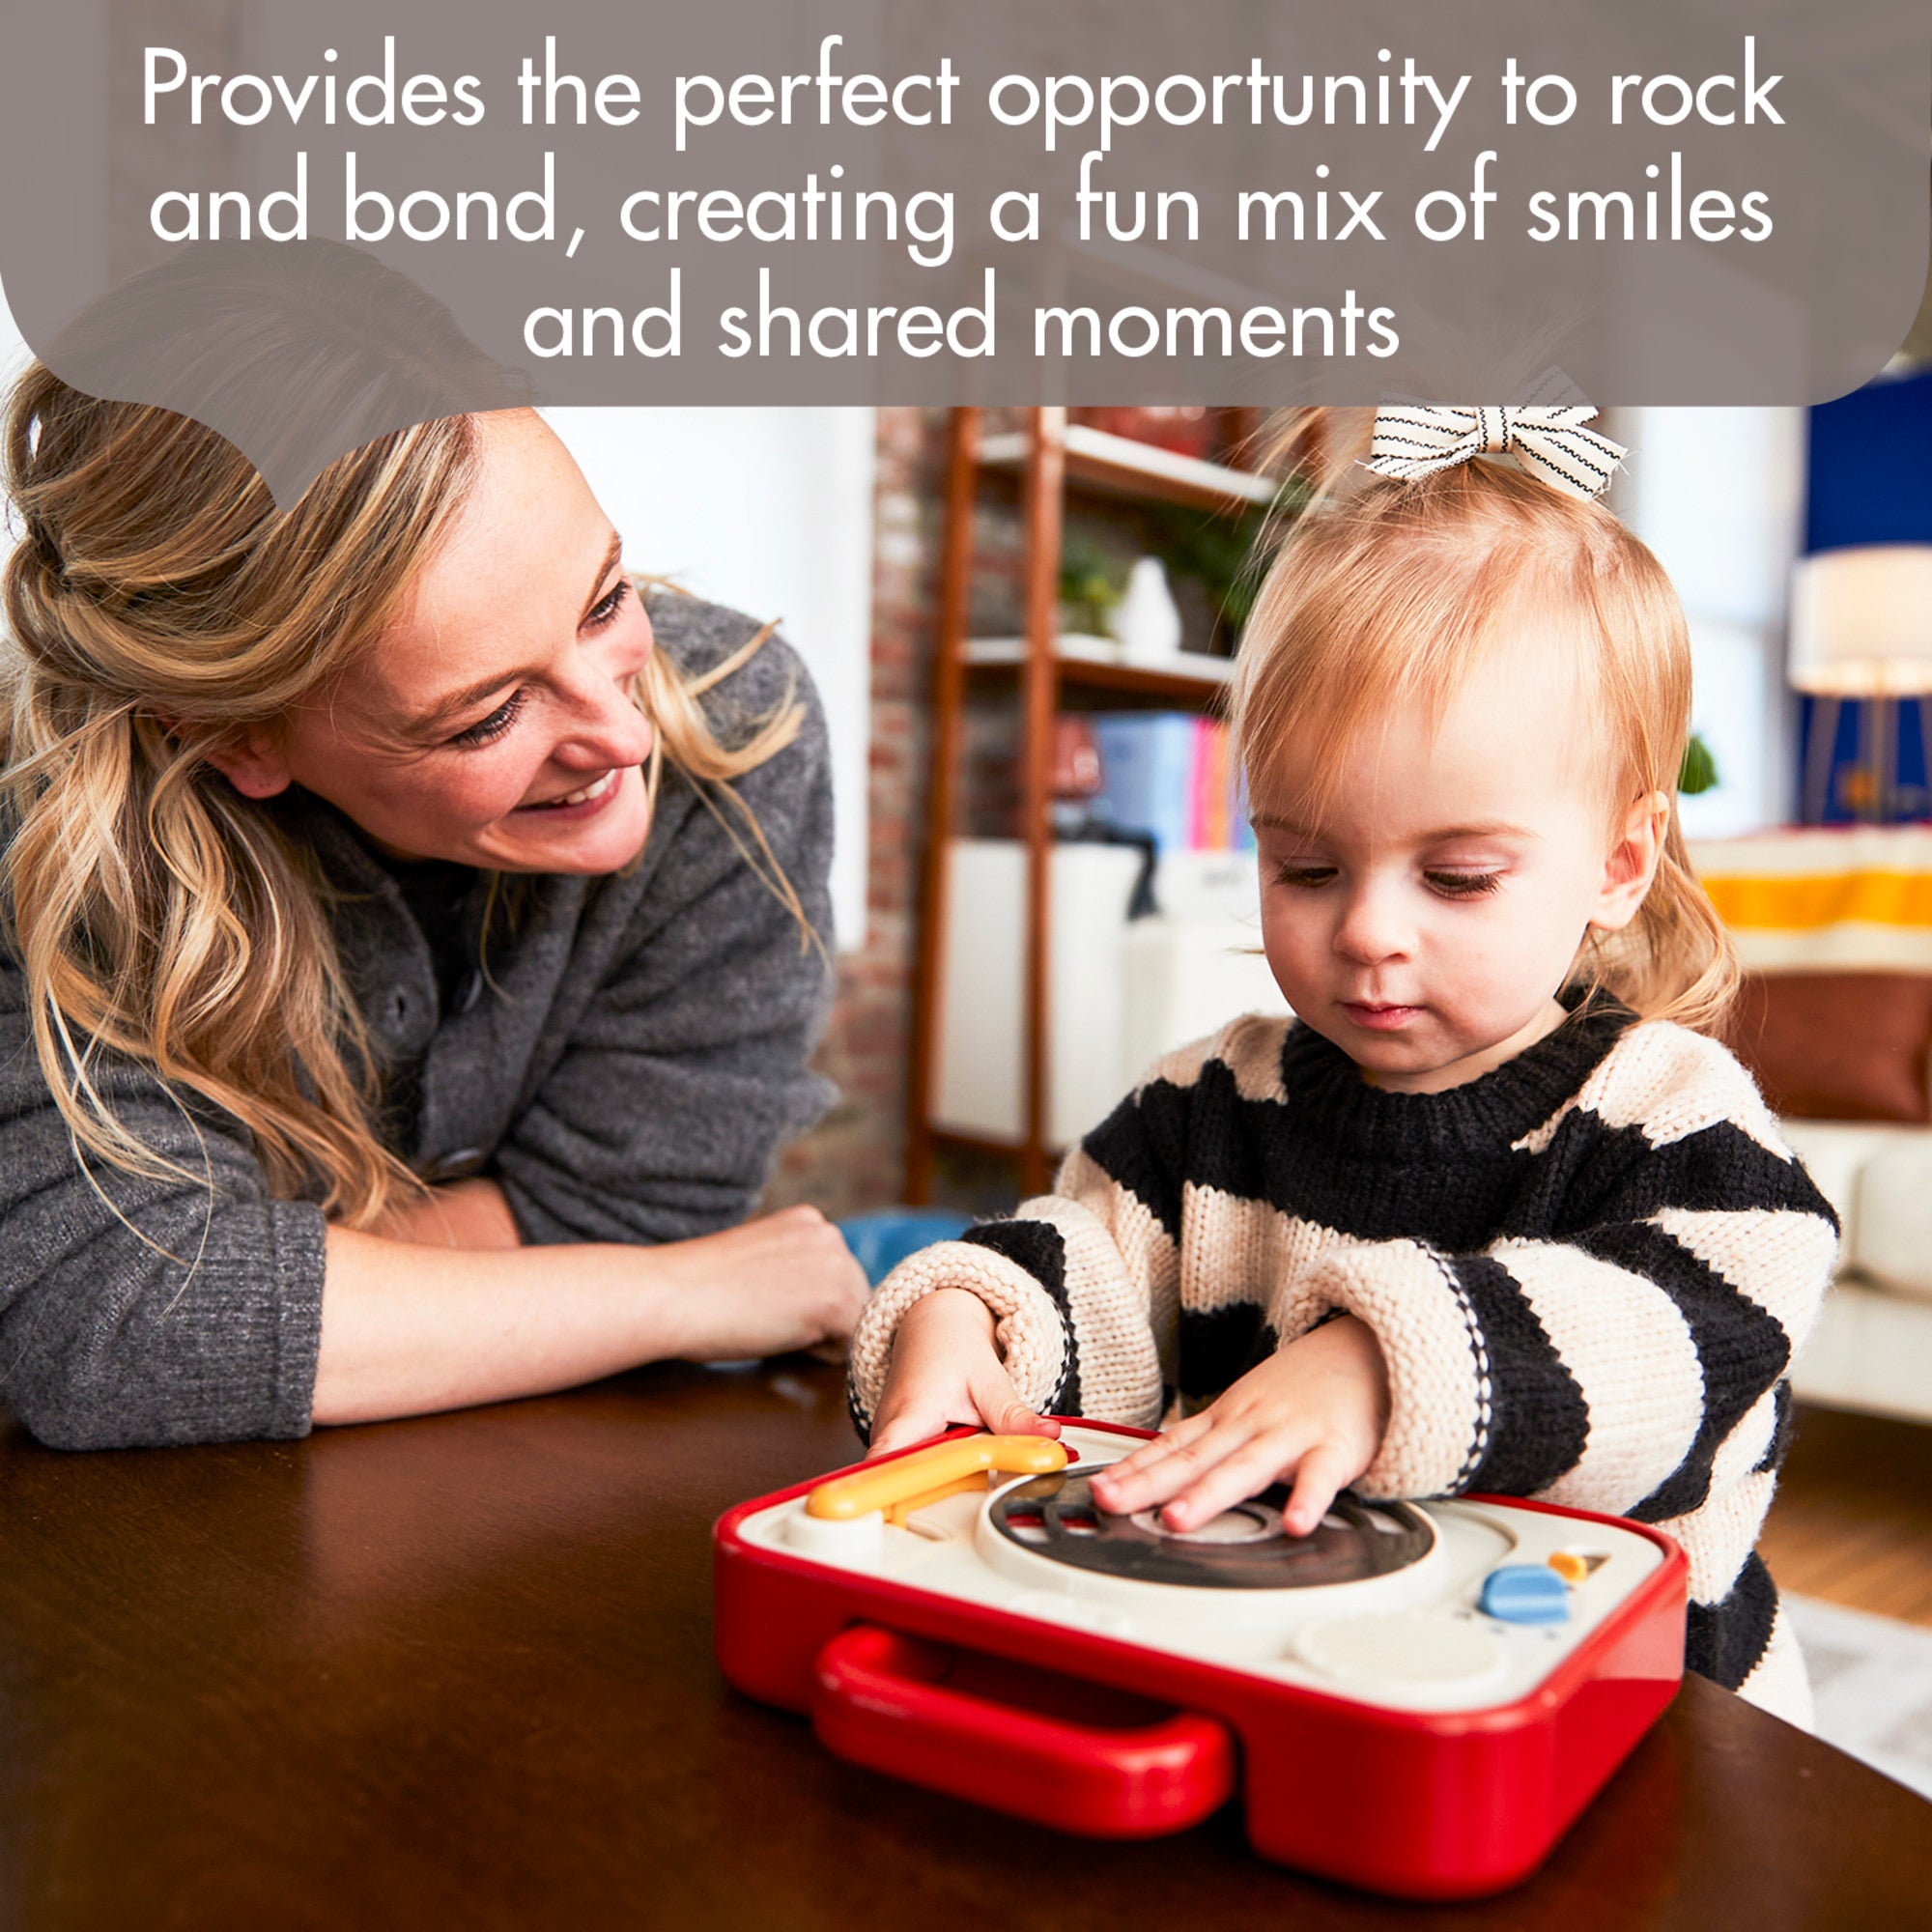 Tiny Rockers DJ Station - Provides the perfect opportunity to rock and bond, creating a fun mix of smiles and shared moments